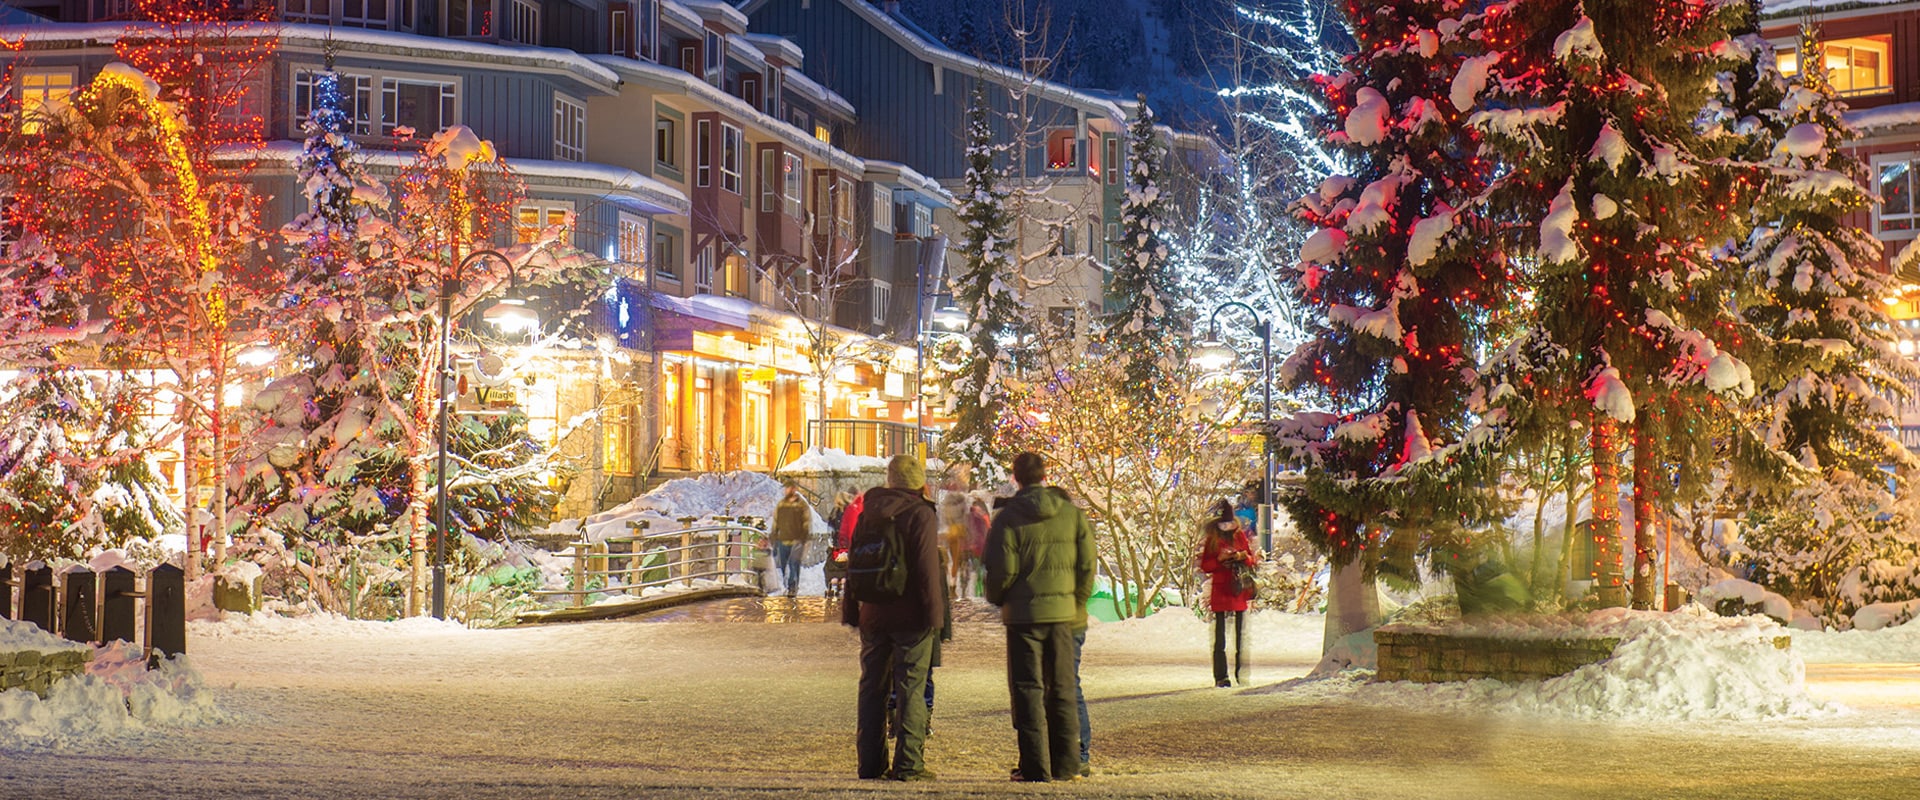 People standing in Whistler Village admiring the Christmas lights, Canada